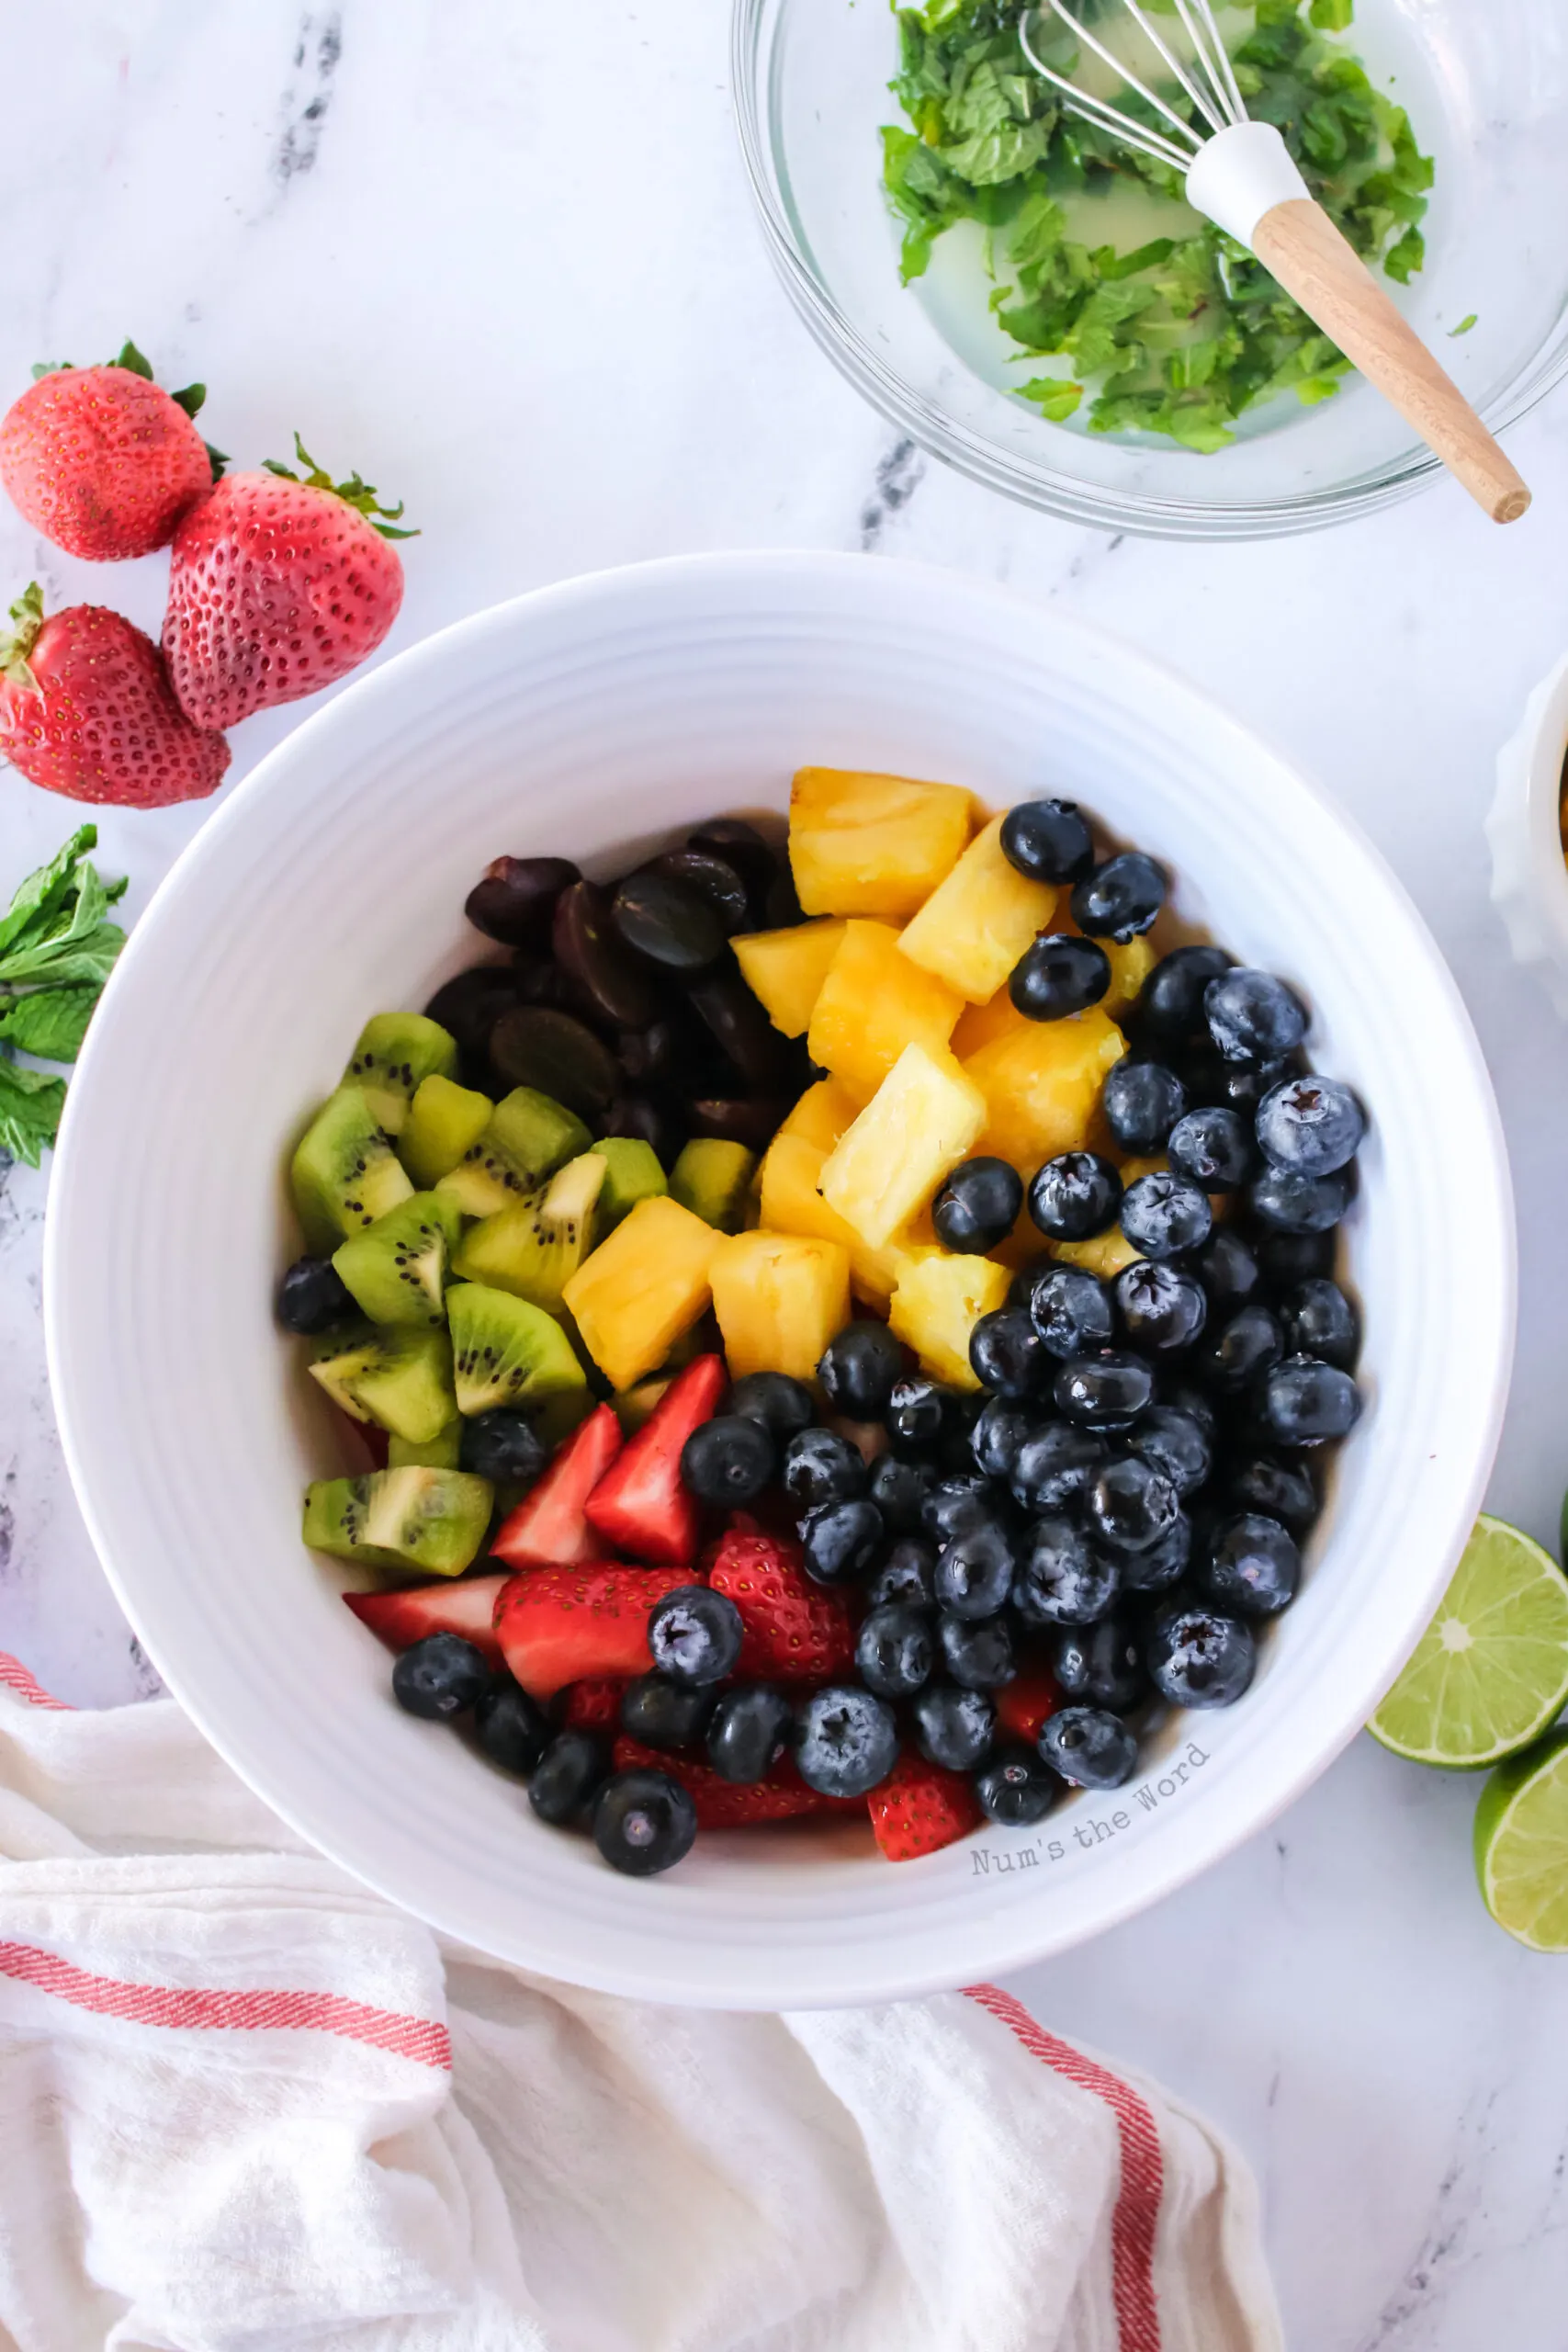 all cut fresh fruit in a bowl, not mixed.